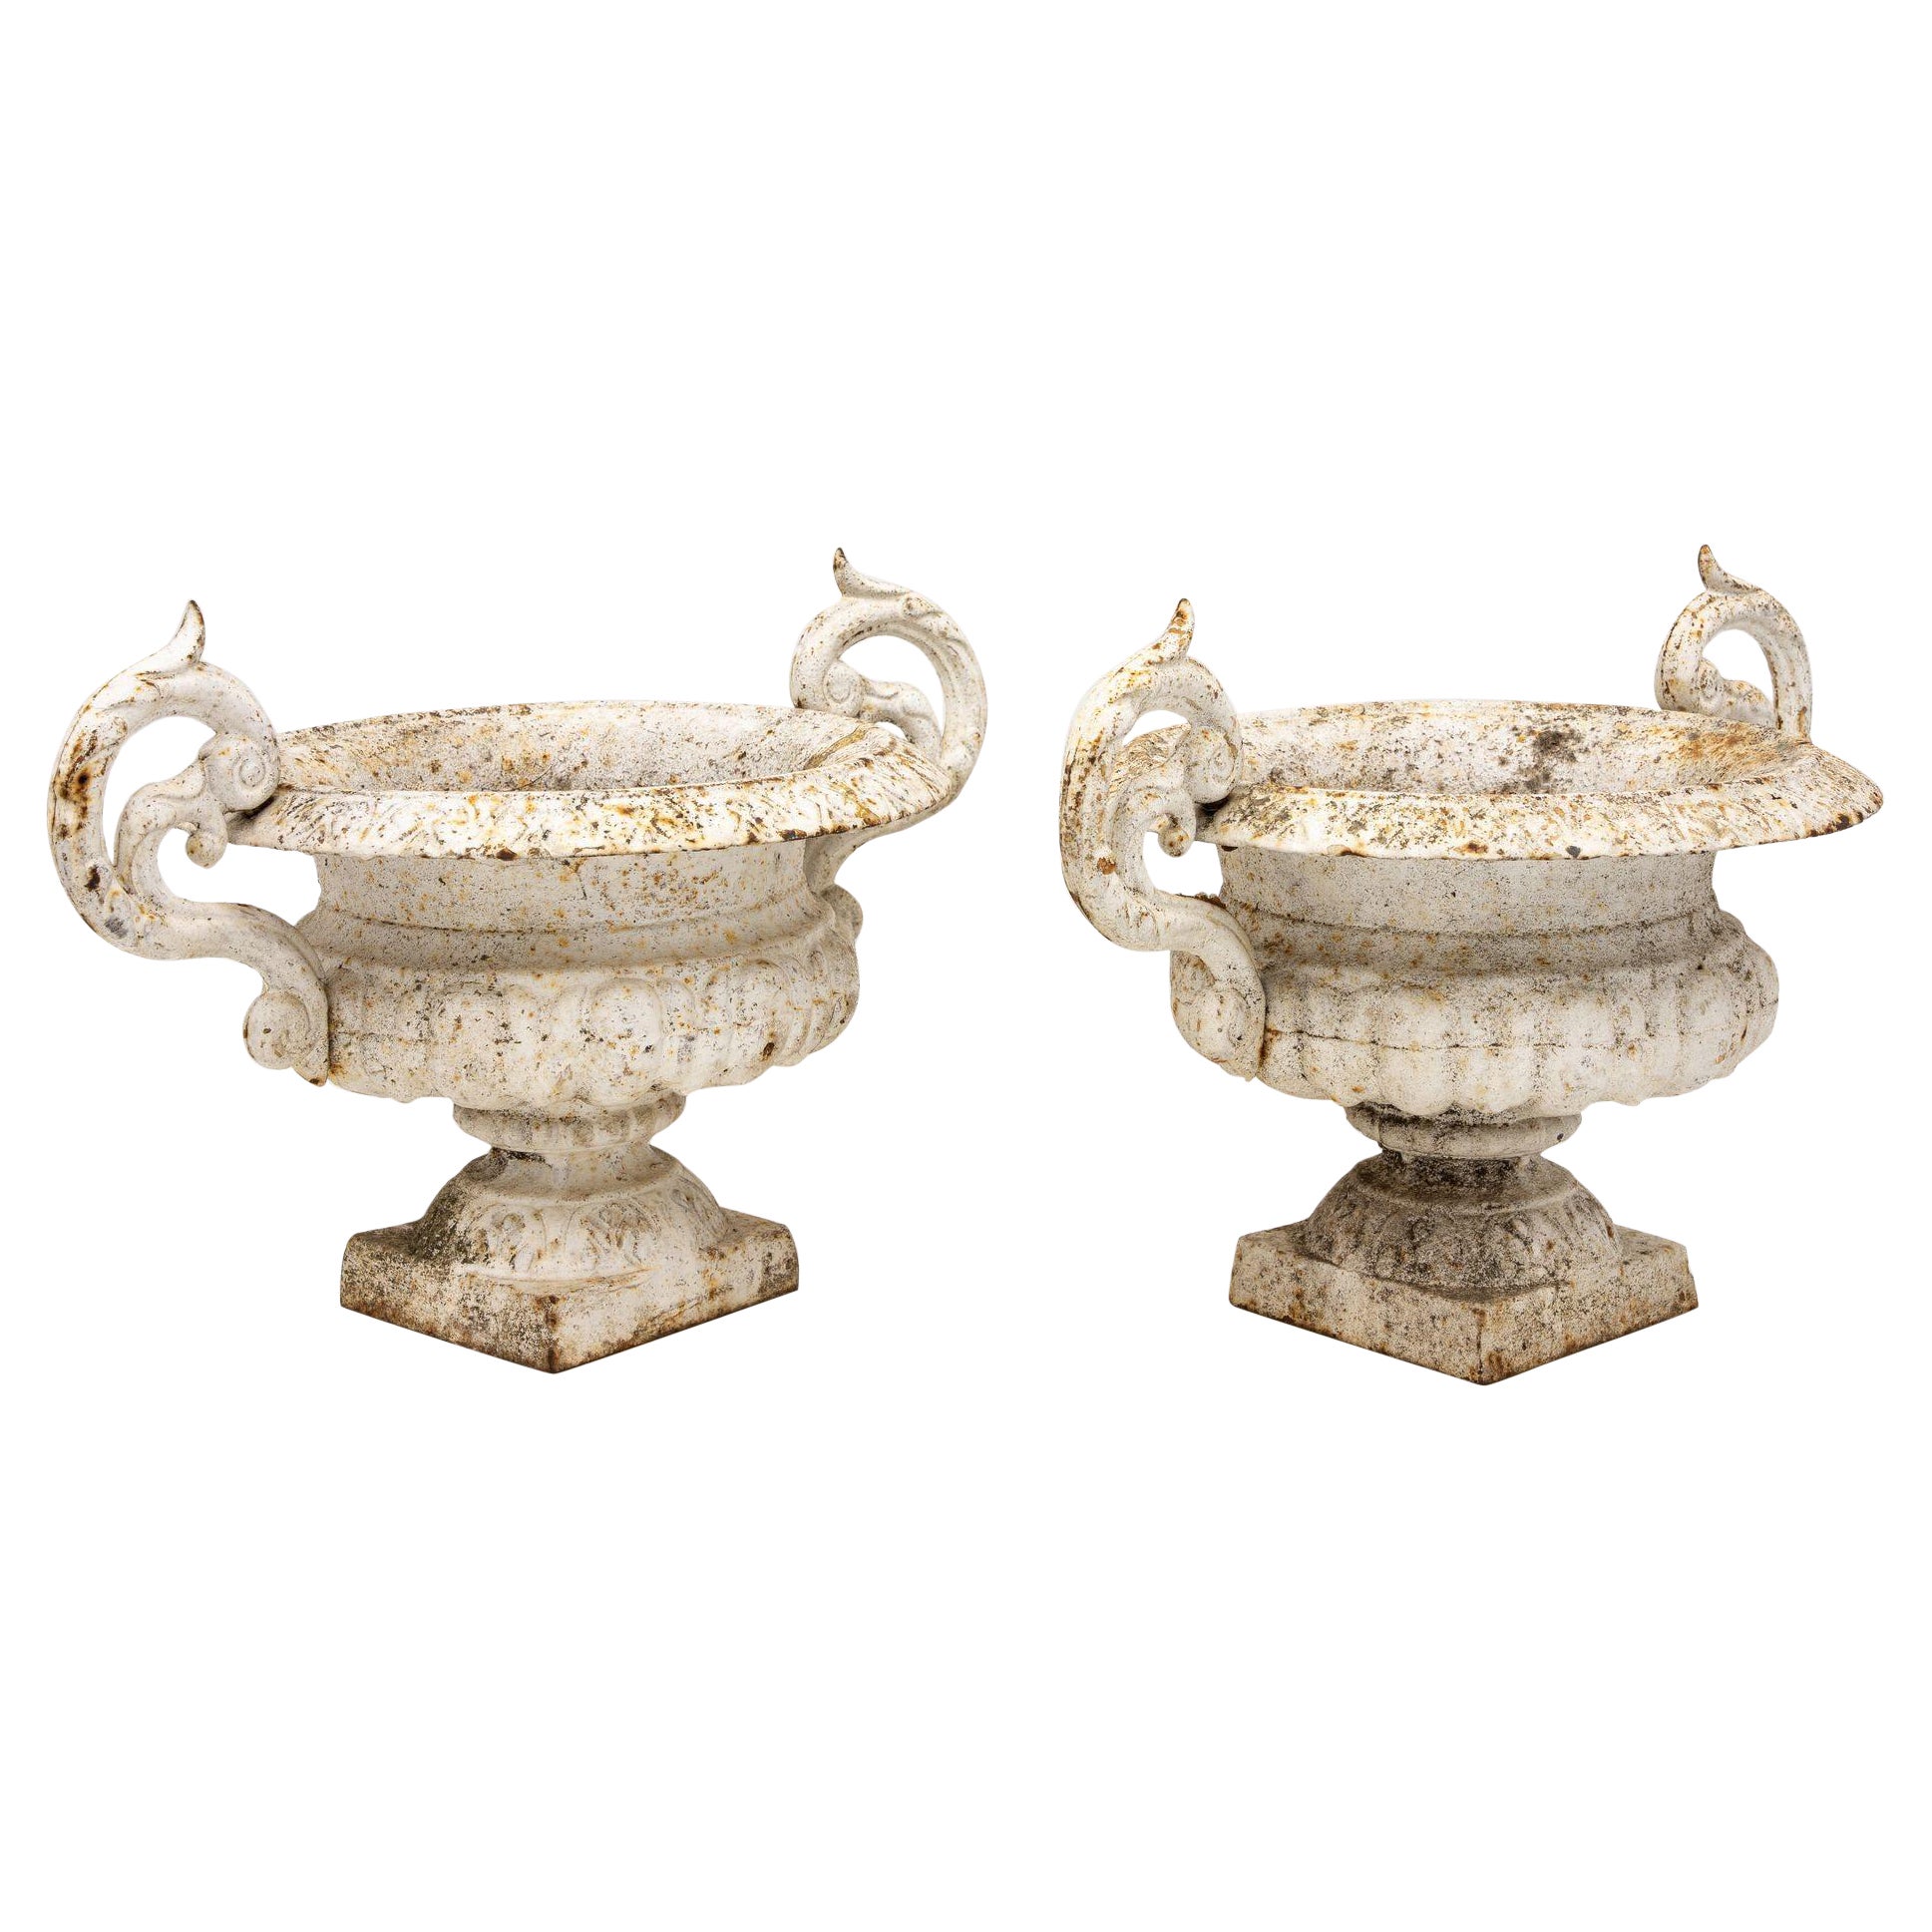 Pair of White Cast Iron Urns, French late 19th Century For Sale